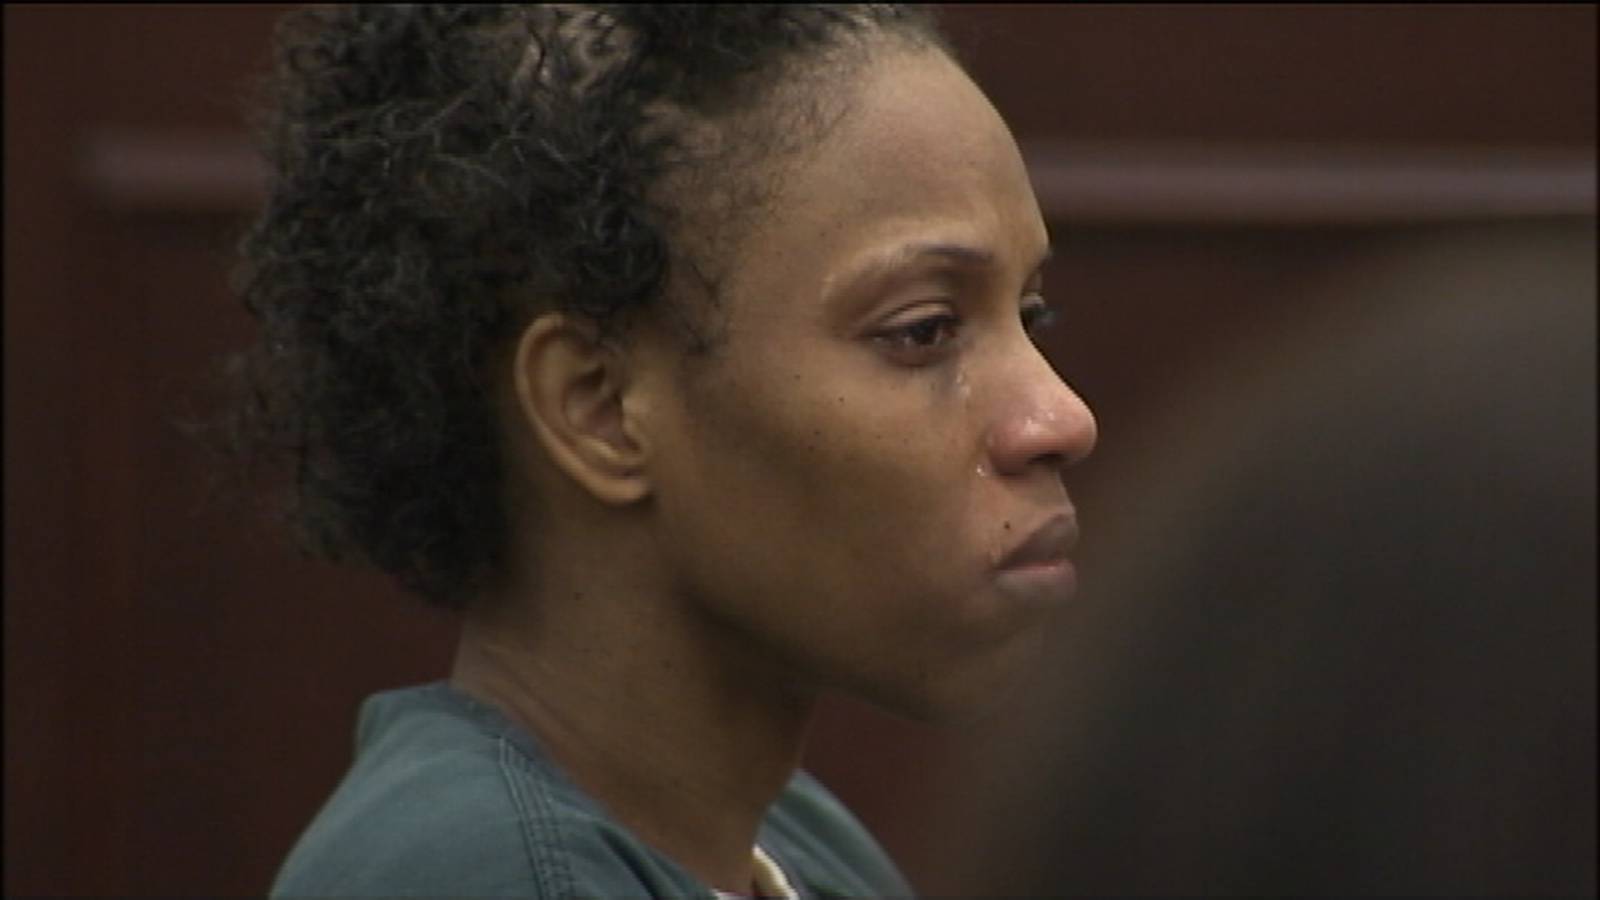 Woman sentenced to life in prison for killing mother – WSB-TV Channel 2 ...